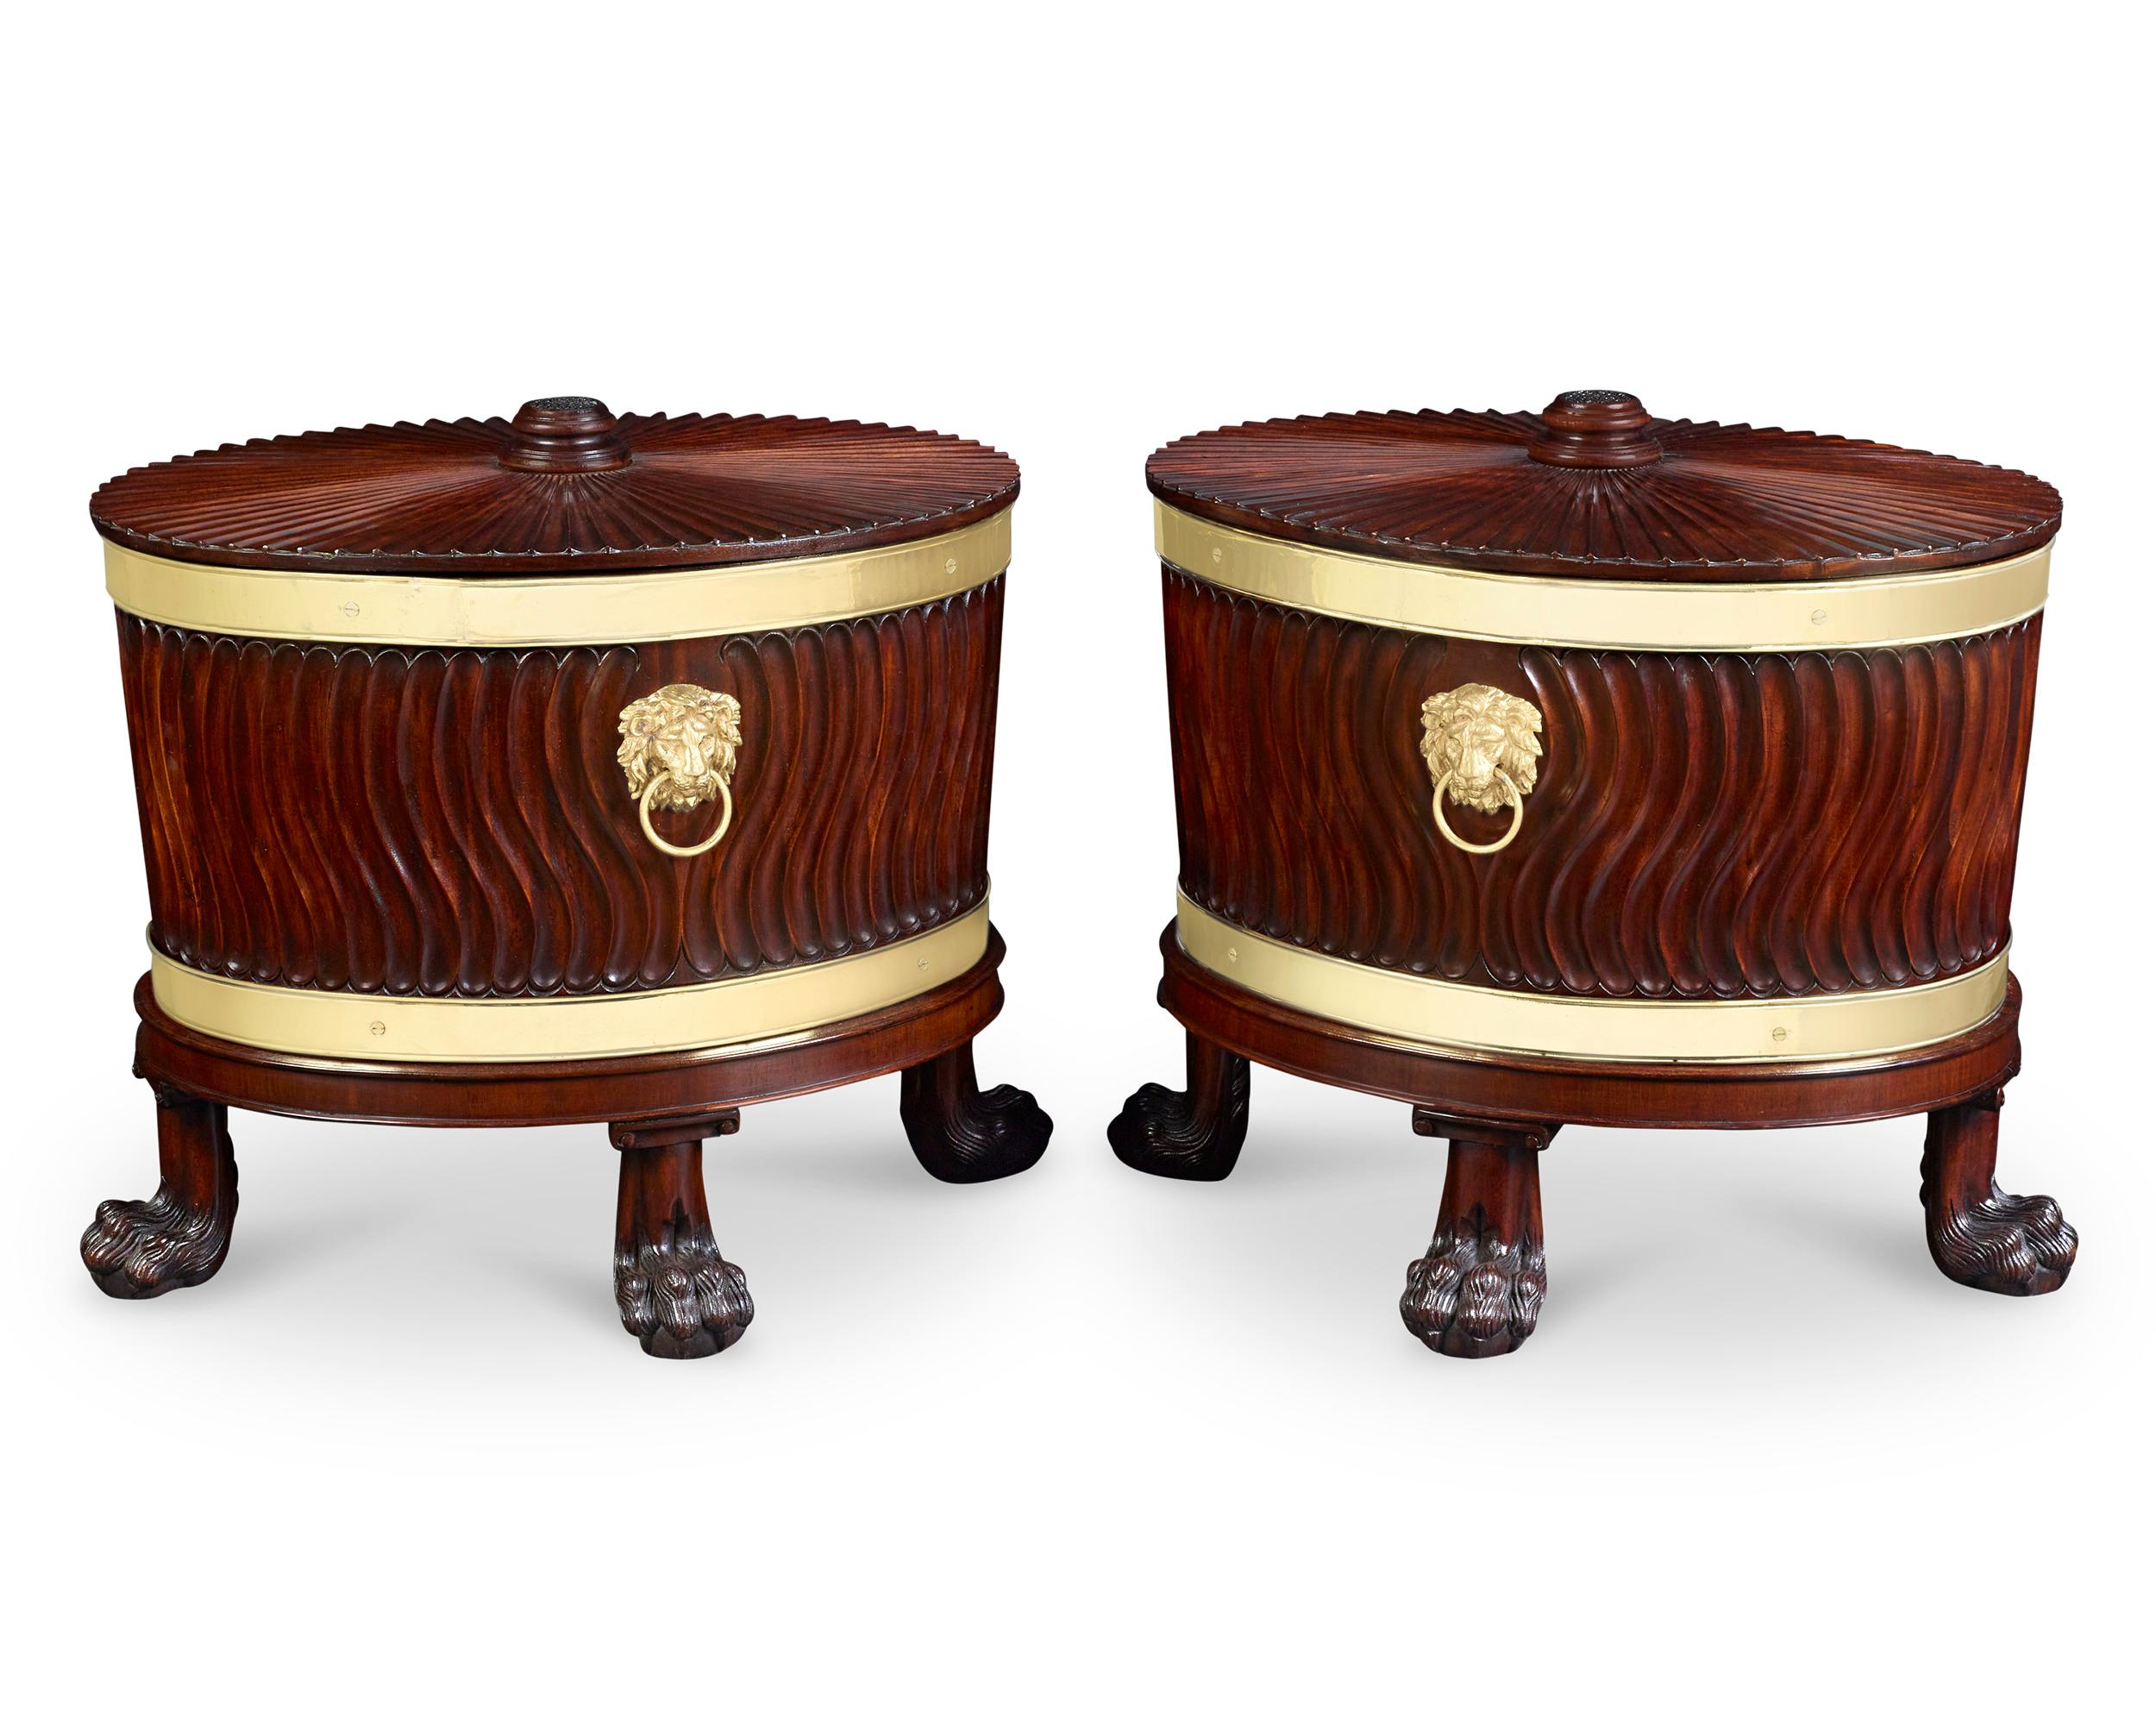 This rare and important pair of George III mahogany wine coolers epitomizes the graceful Neoclassical aesthetic championed in the Georgian style. Crafted of the finest quality mahogany, the coolers retain their original zinc liners. The top of the